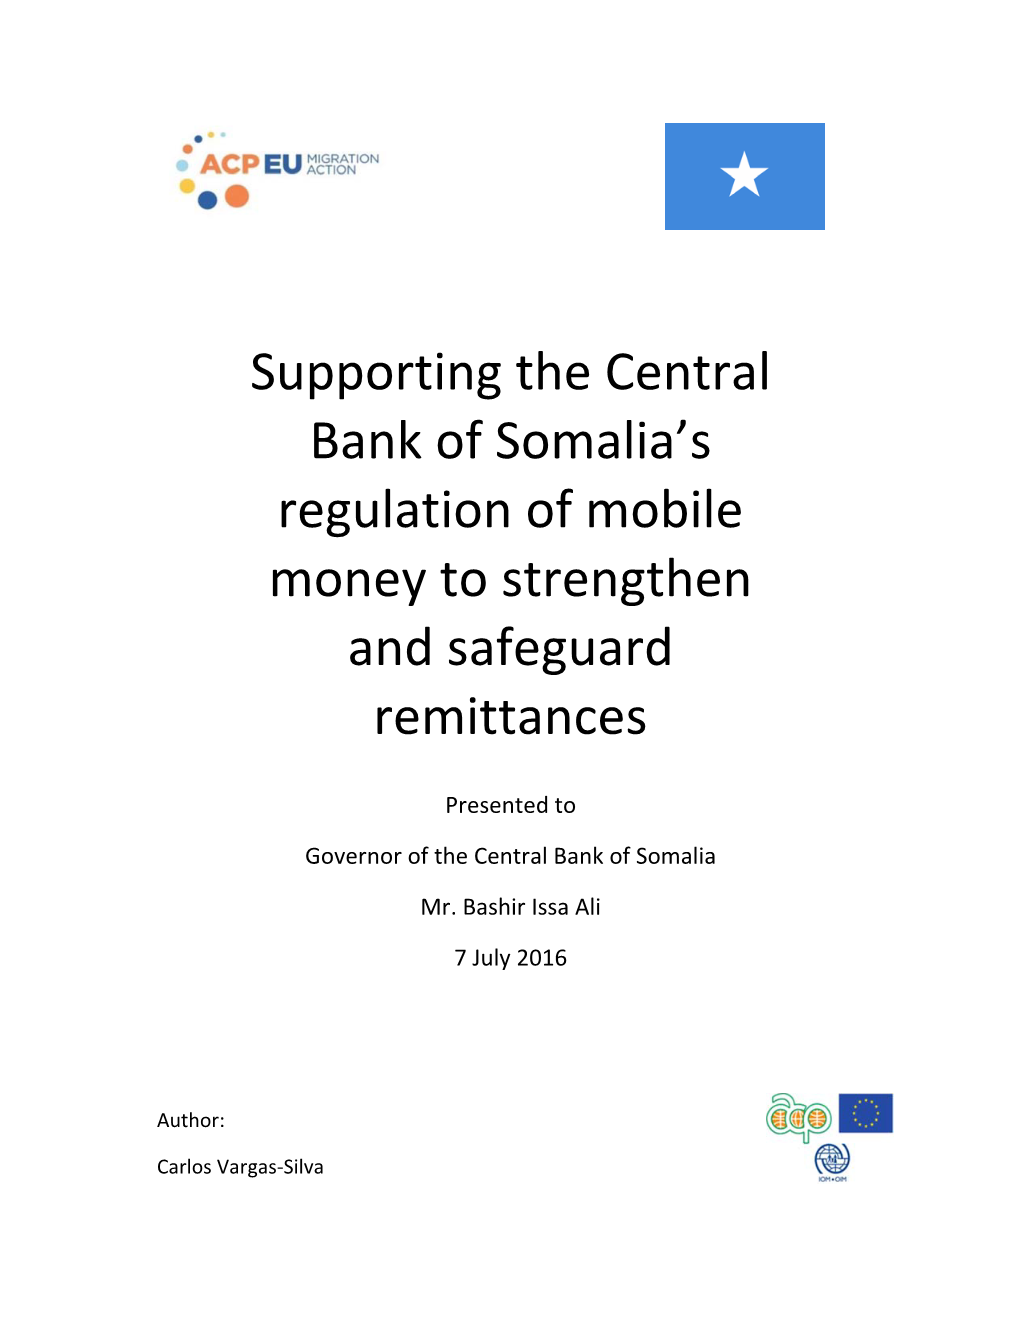 Supporting the Central Bank of Somalia's Regulation of Mobile